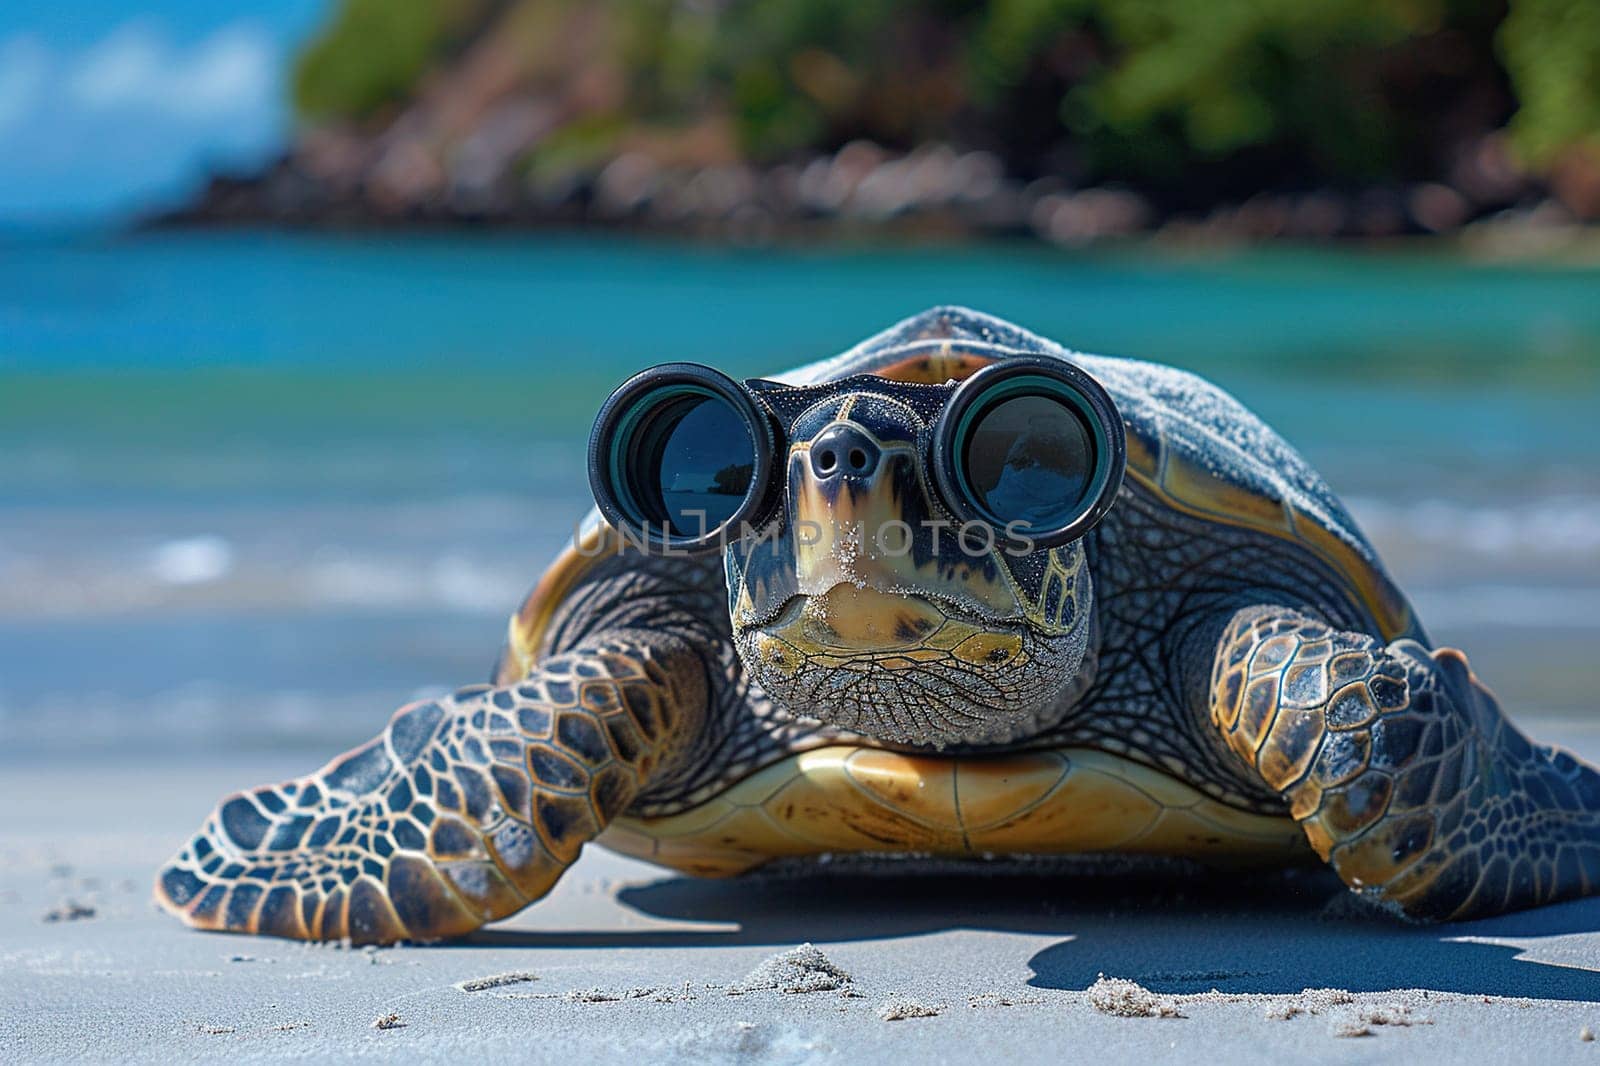 Turtle with binoculars in front of his eyes on a sandy beach.